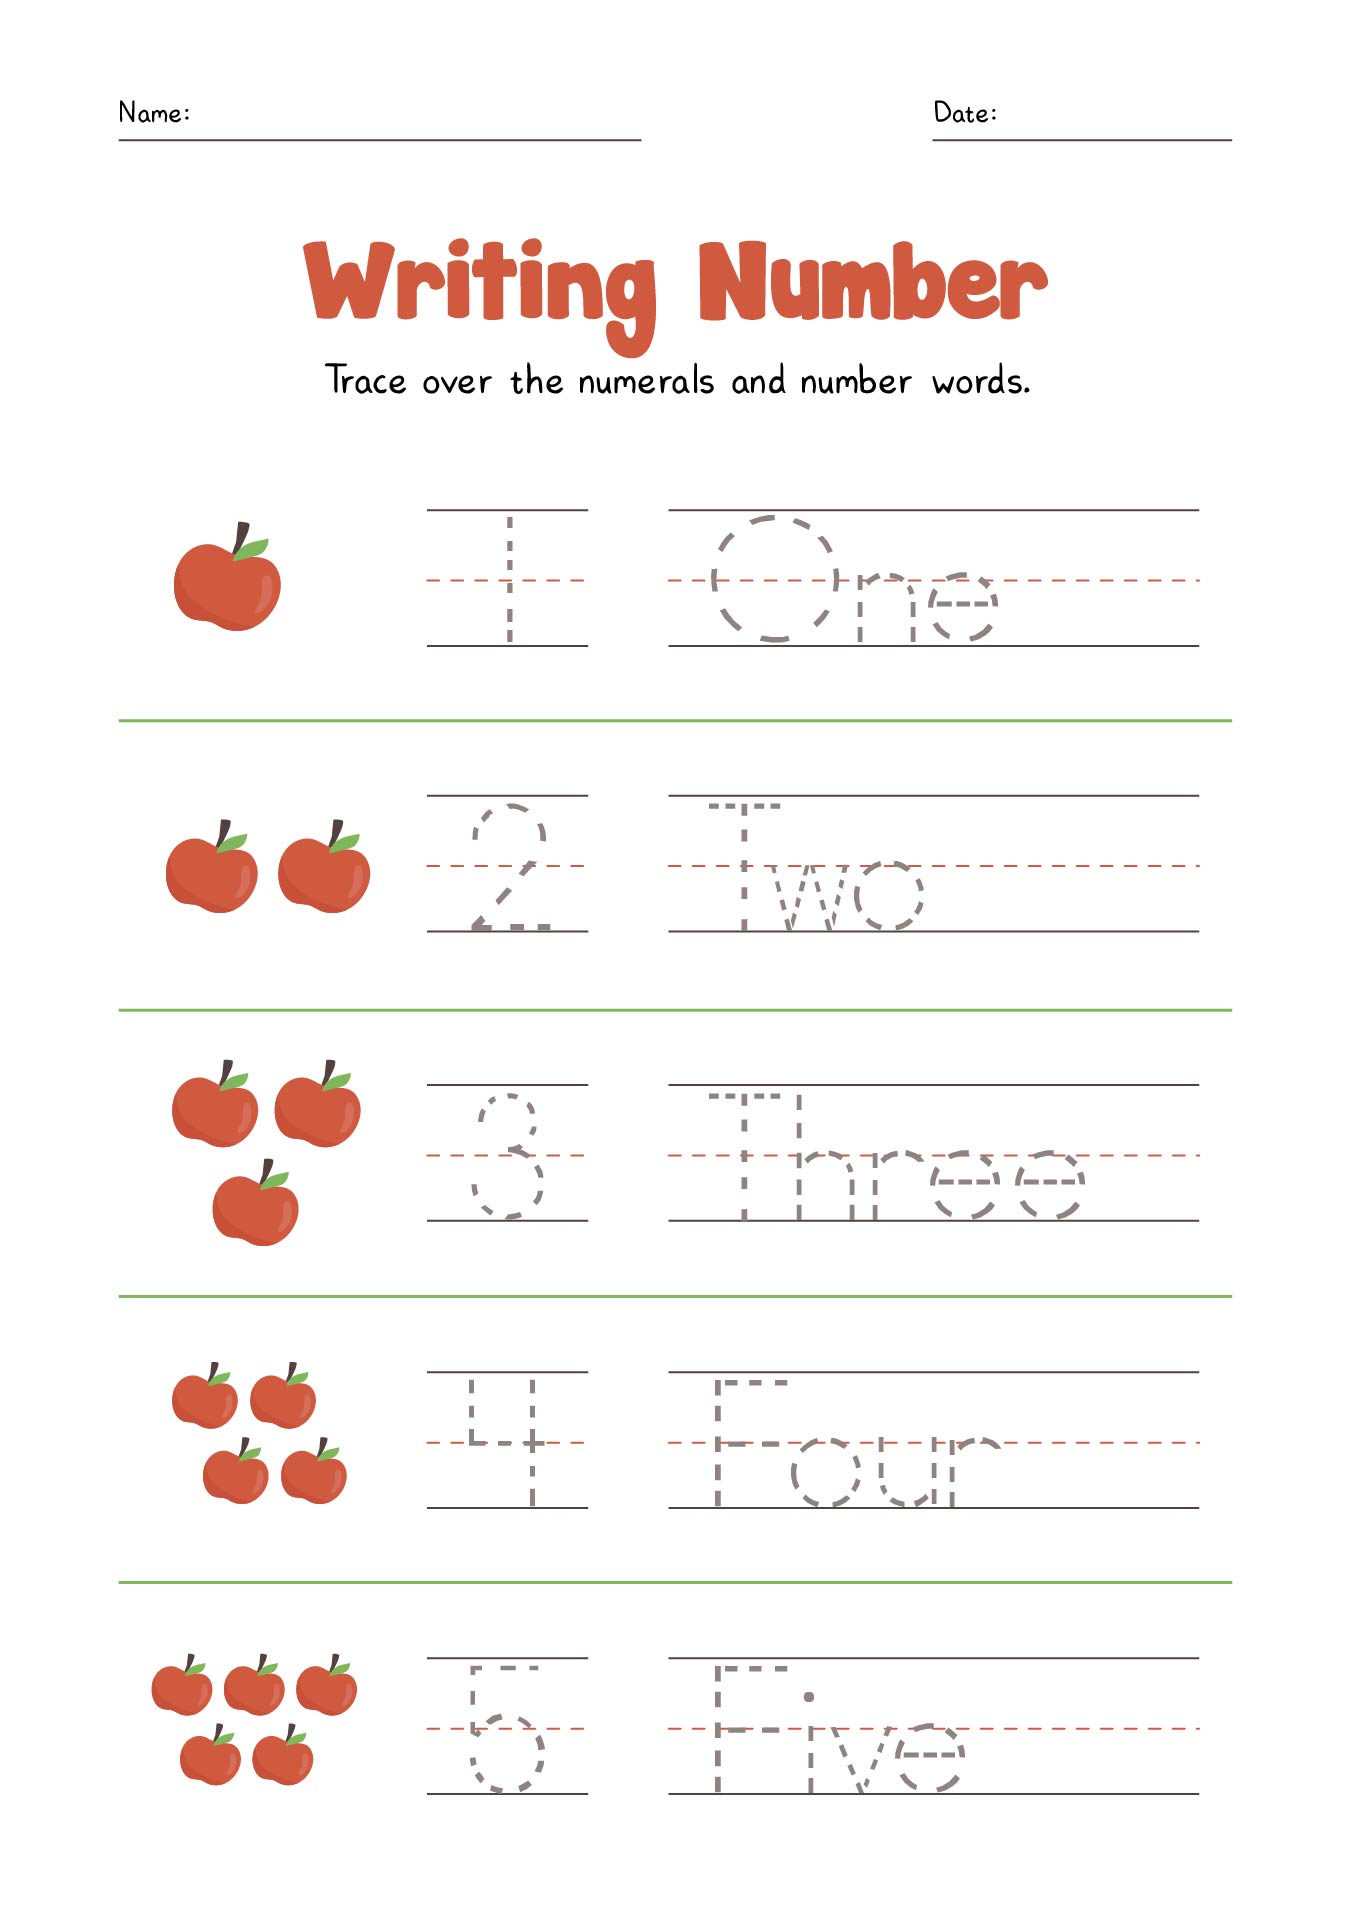 8-best-images-of-1st-grade-handwriting-printables-1st-grade-writing-worksheets-1st-grade